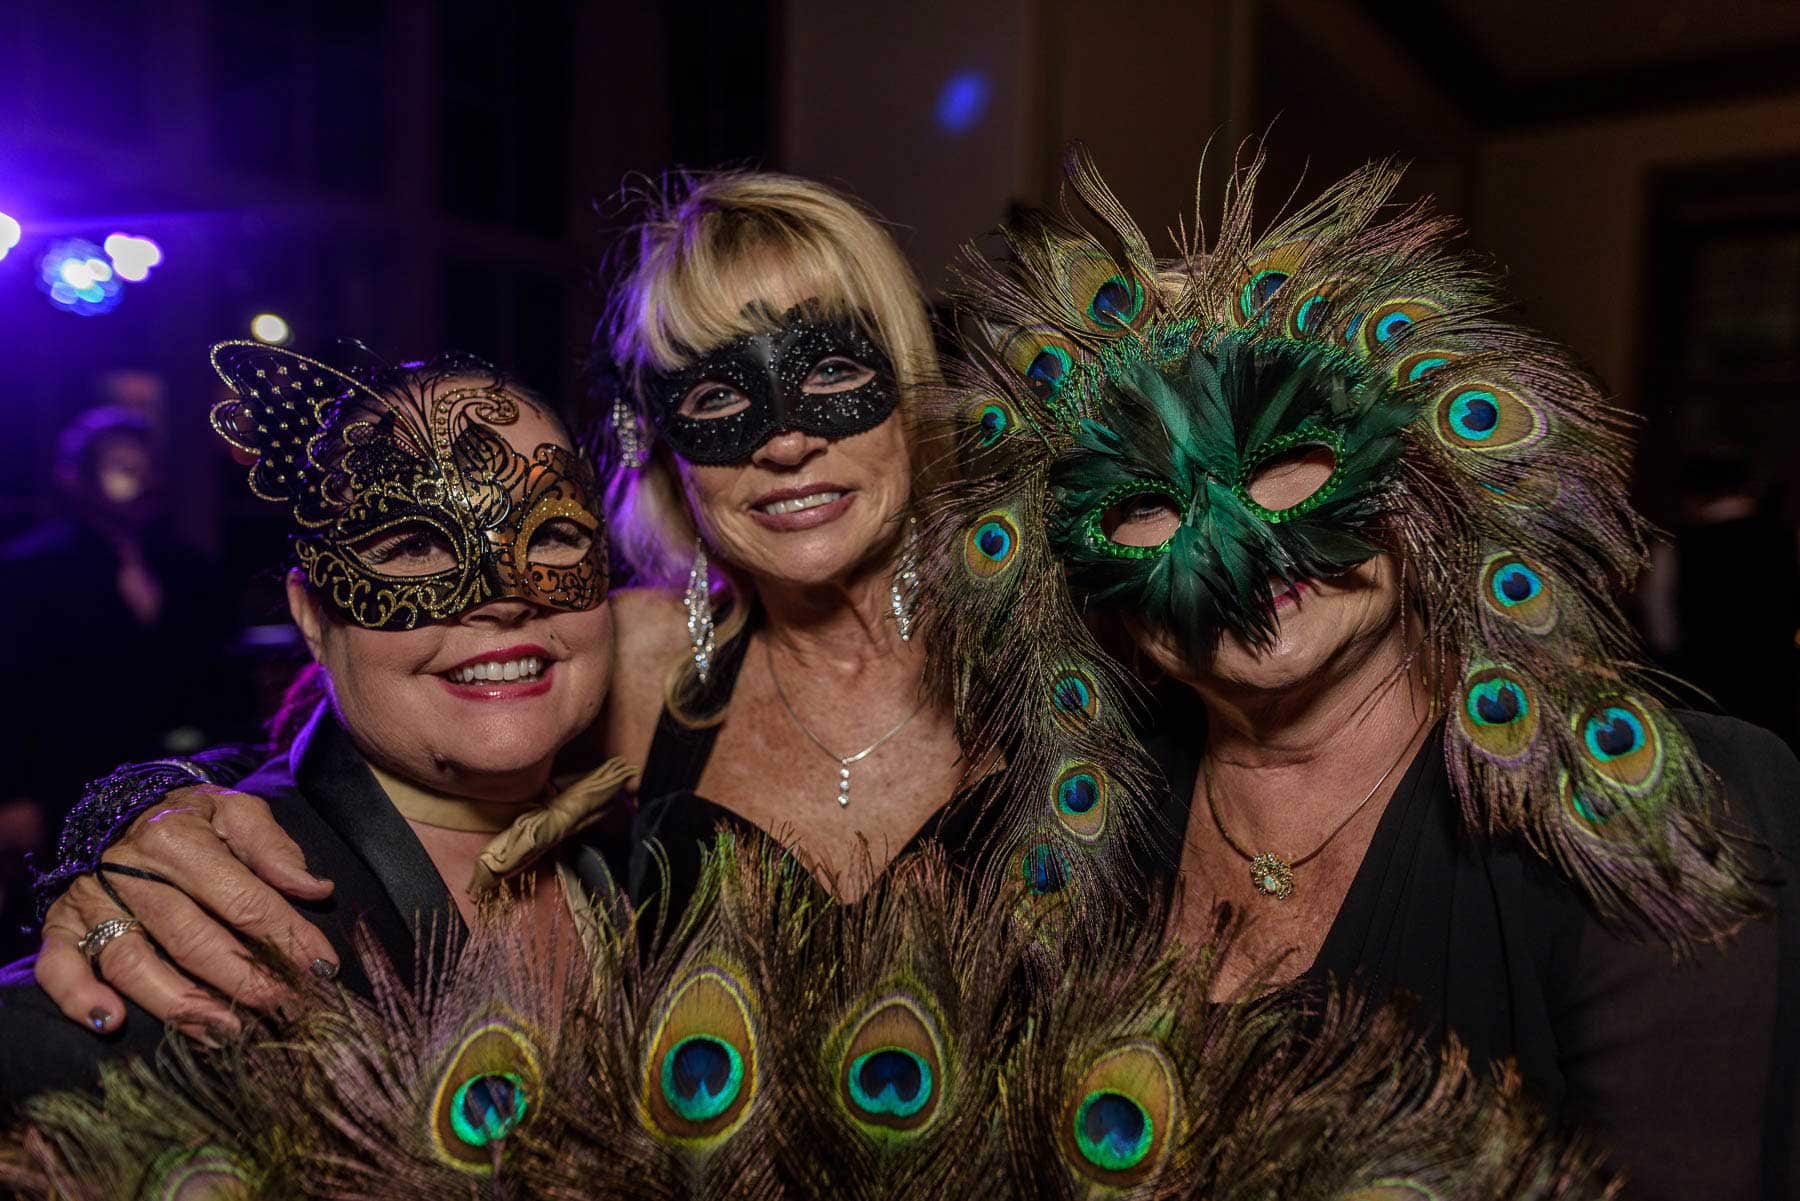 An adult birthday masquerade party